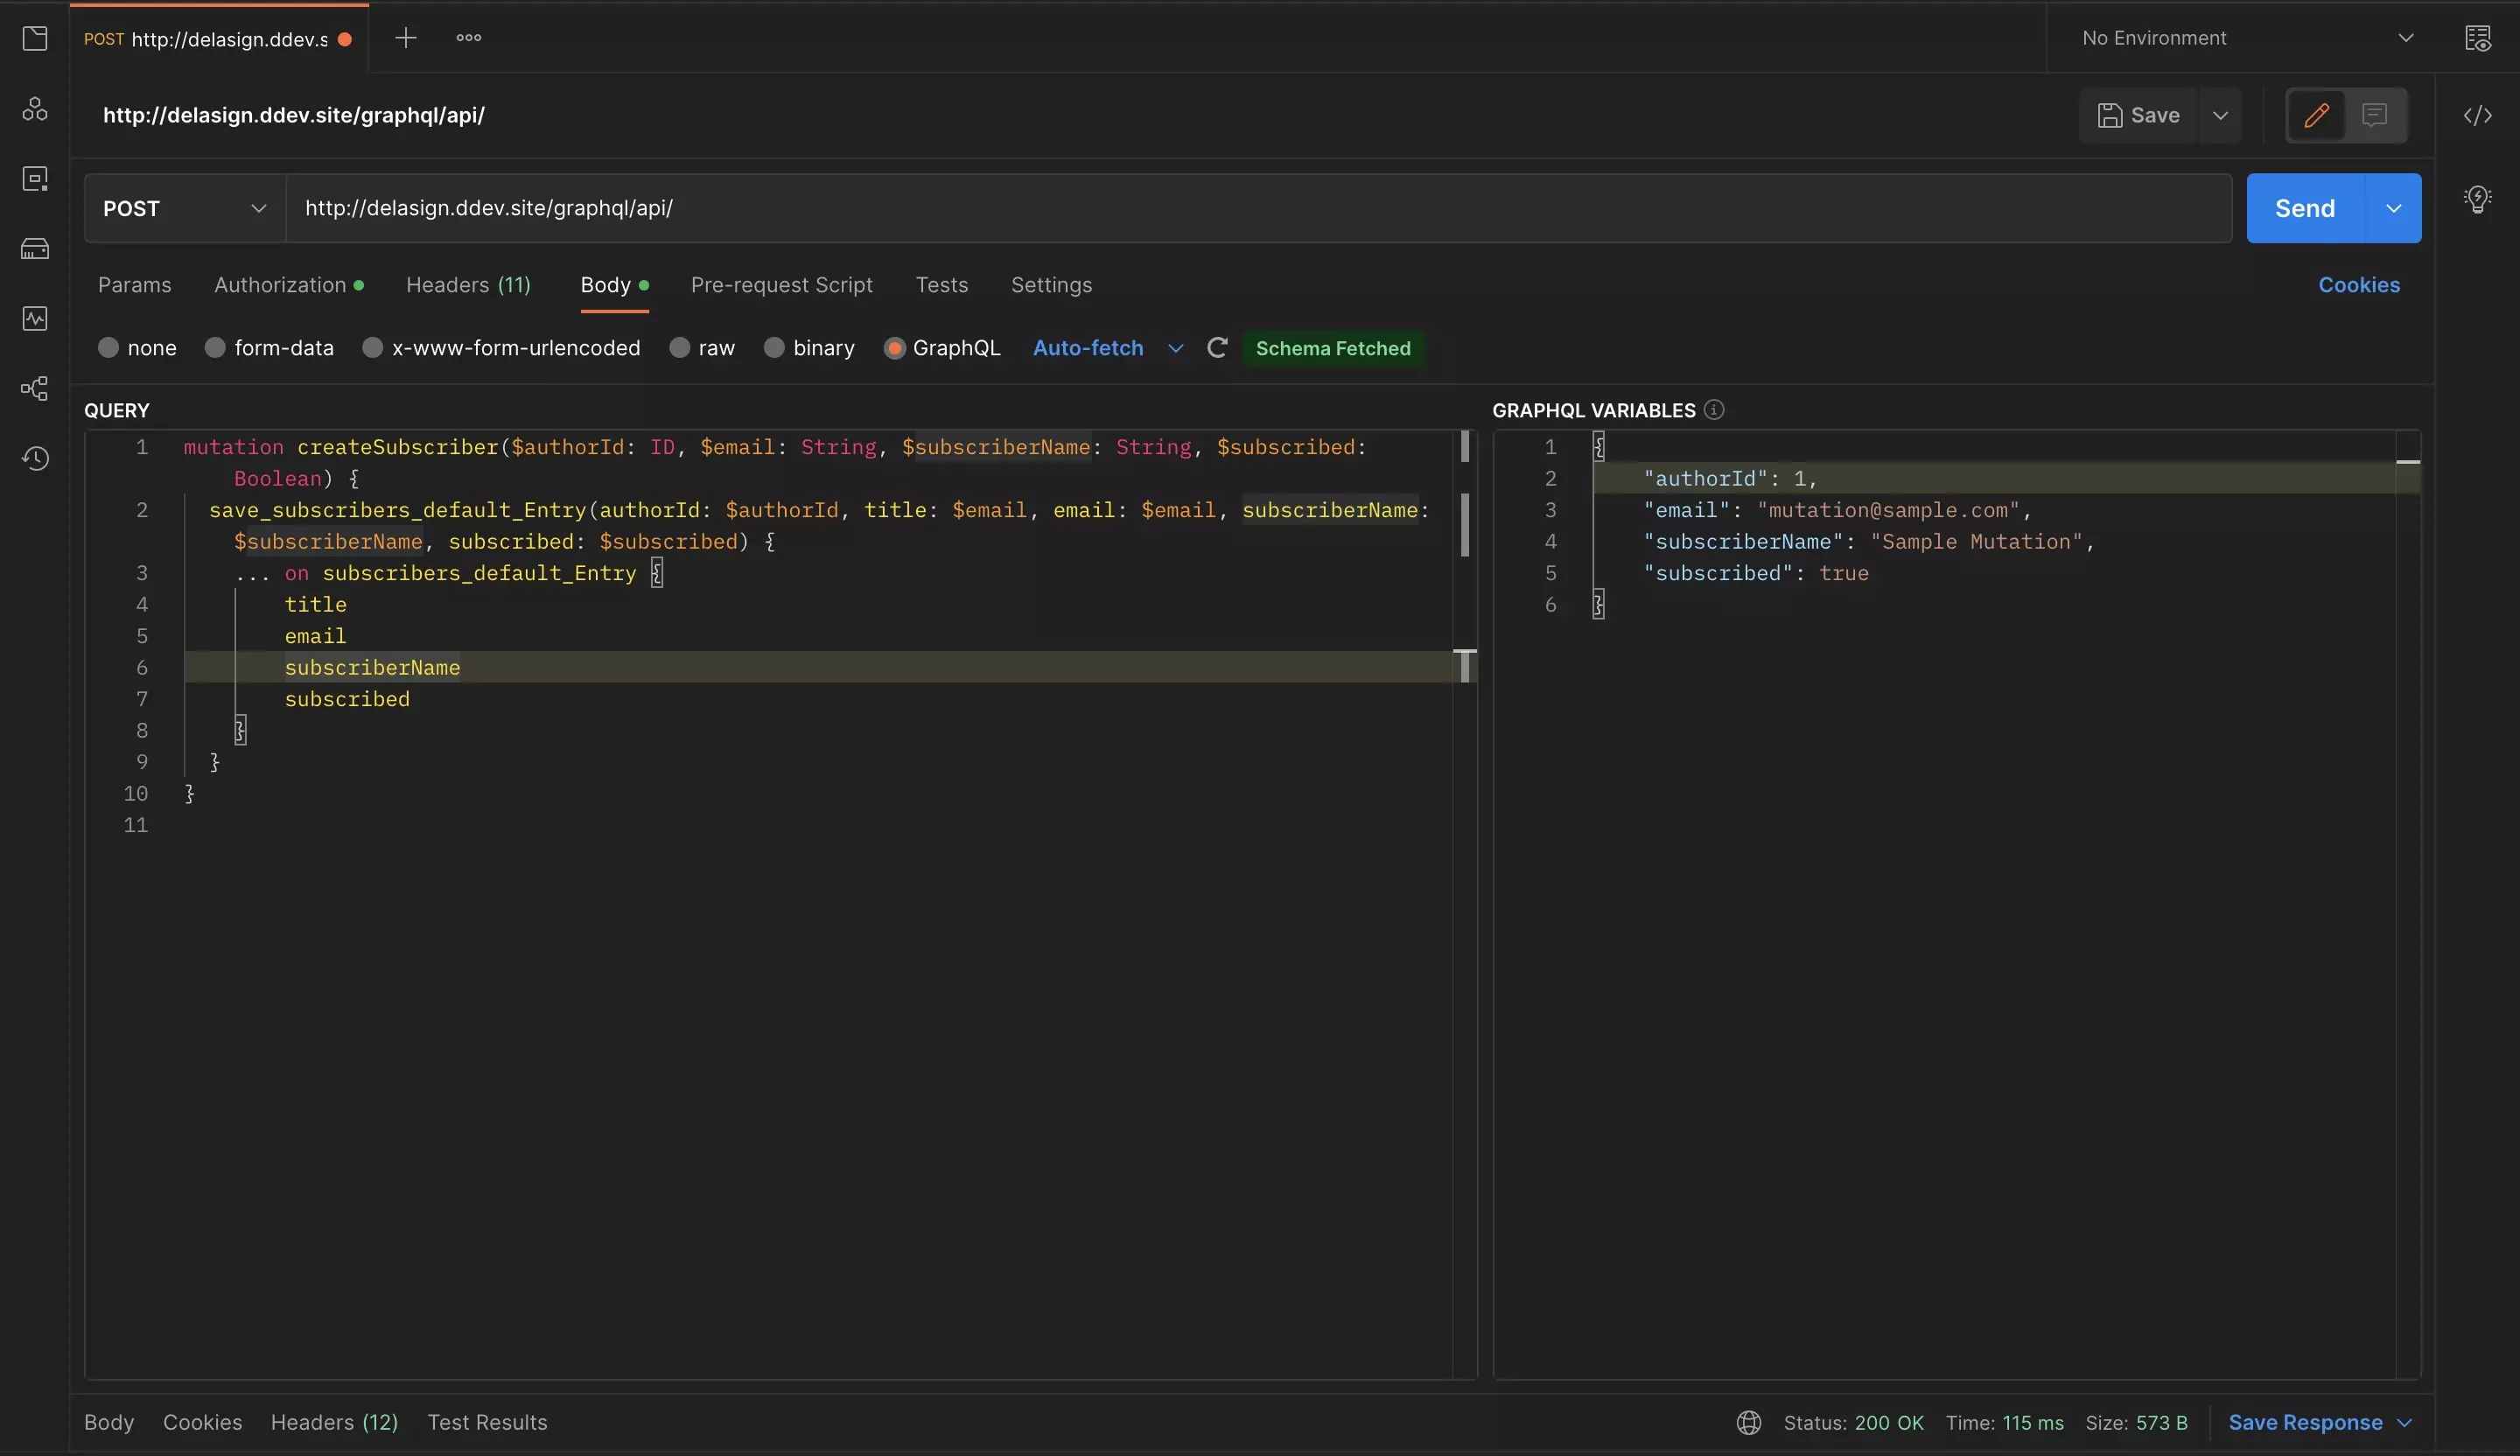 A screenshot of Postman showing the completed GraphQL mutation and variables.